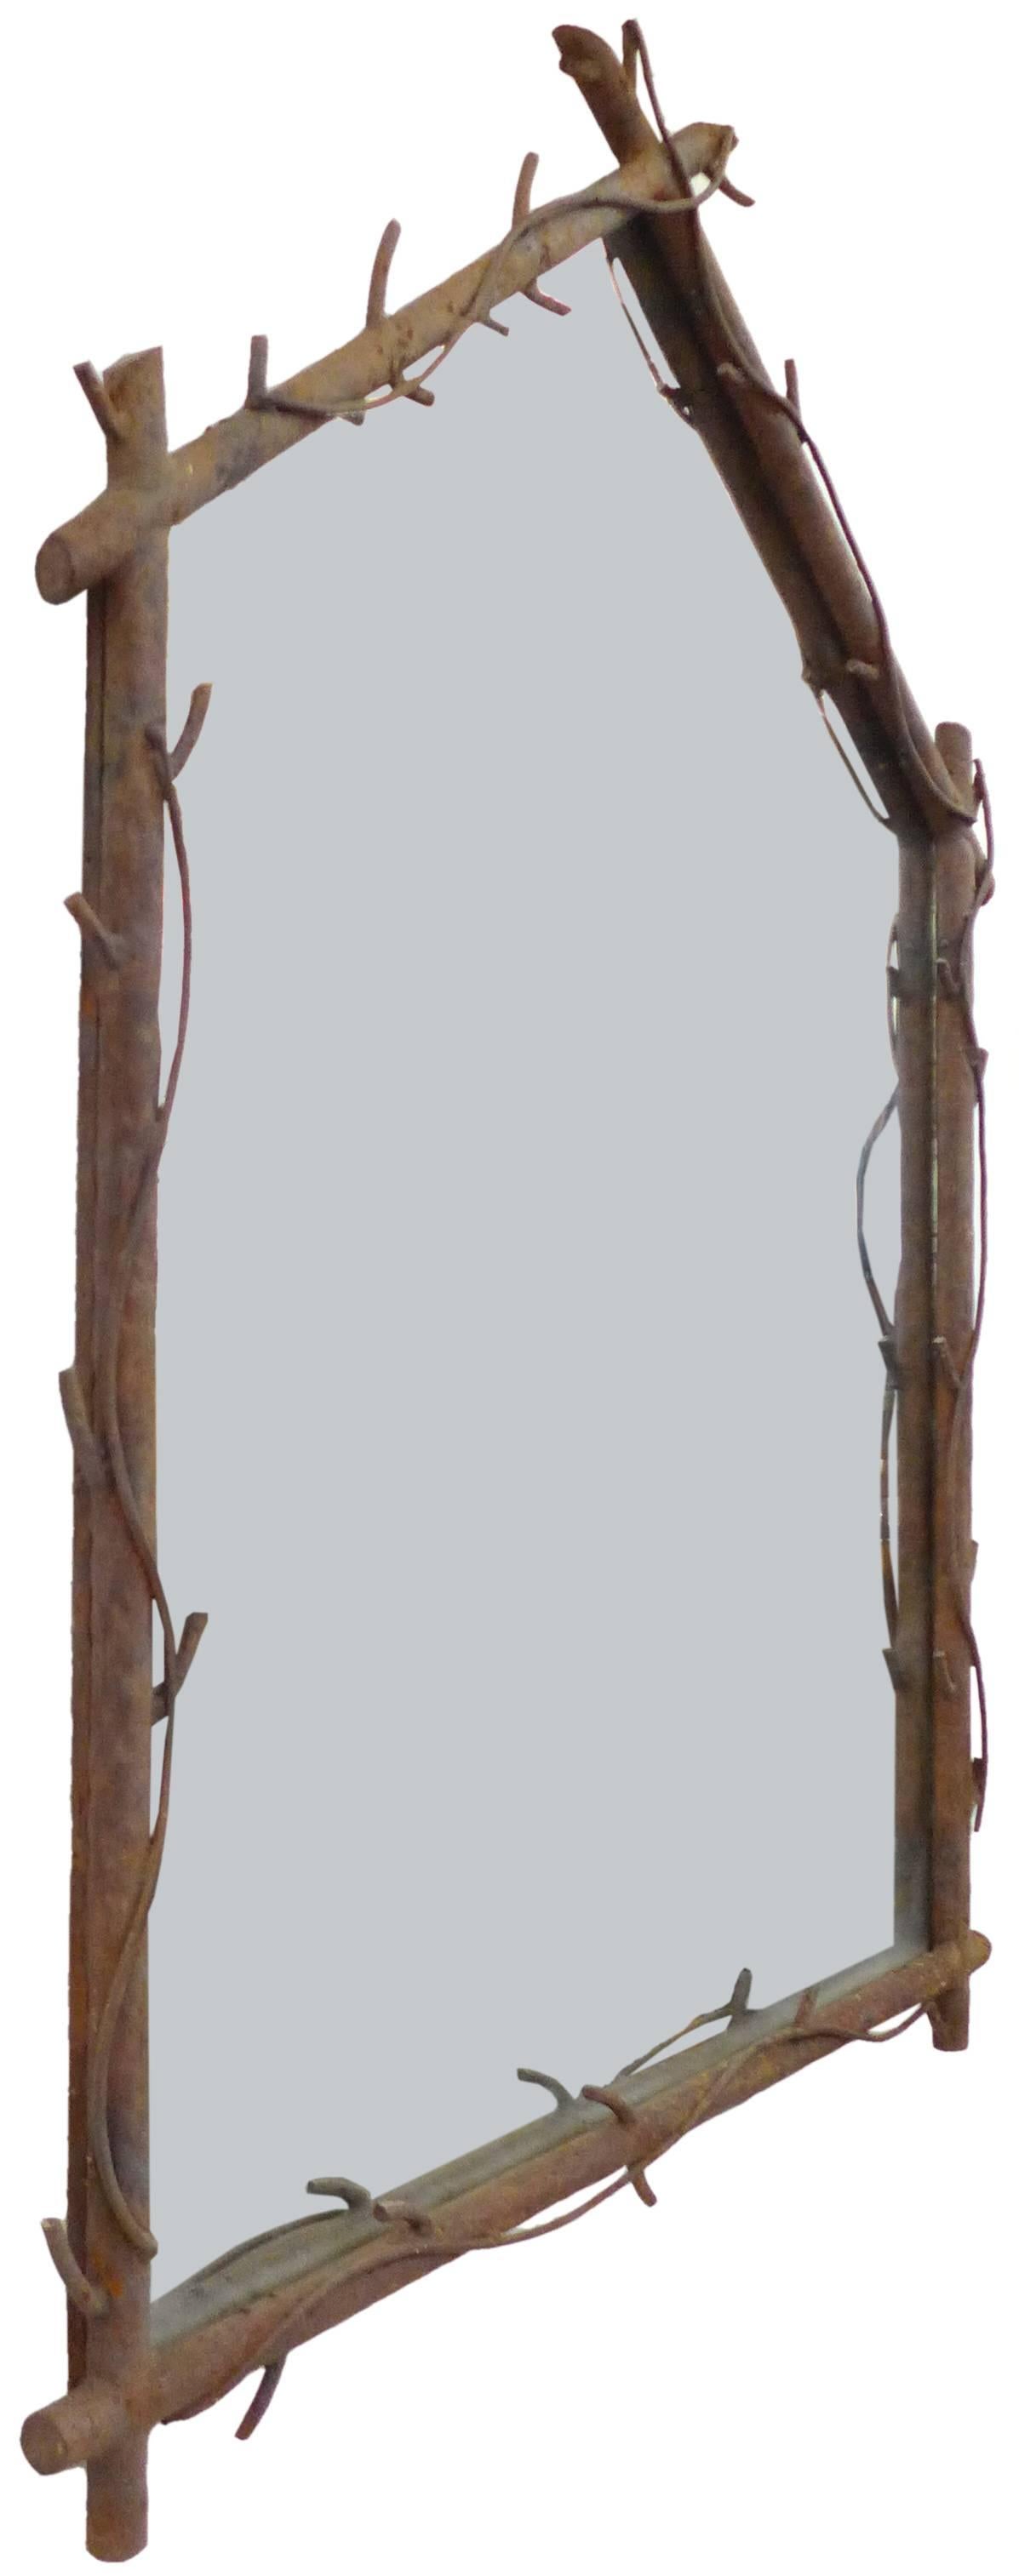 A substantial and extraordinary welded-steel, faux-bois mirror.  A wonderfully evocative, scratch-built, likely one-of-a-kind construction of intersecting tubular-steel shafts wearing simple, subtly-stylized, broken-off branches and vines; combining